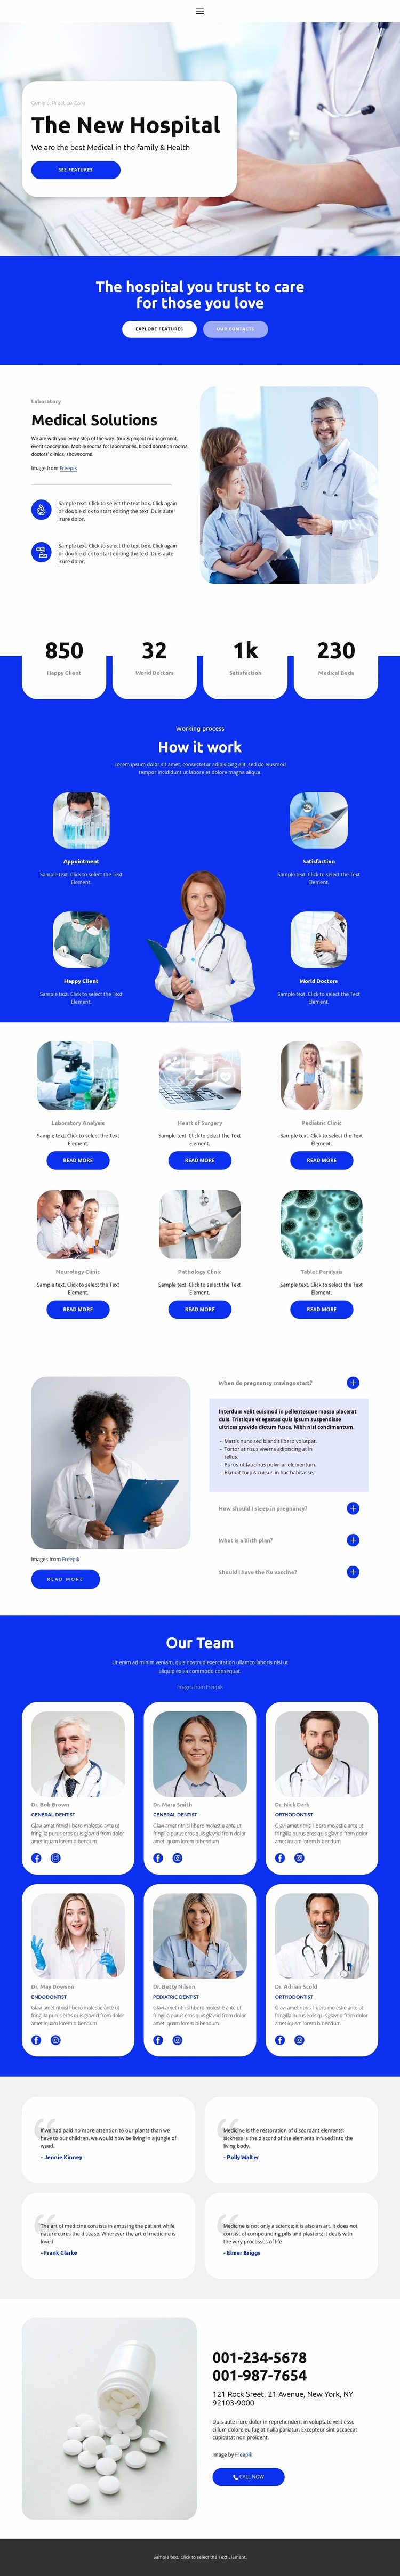 The New Hospital Web Page Design